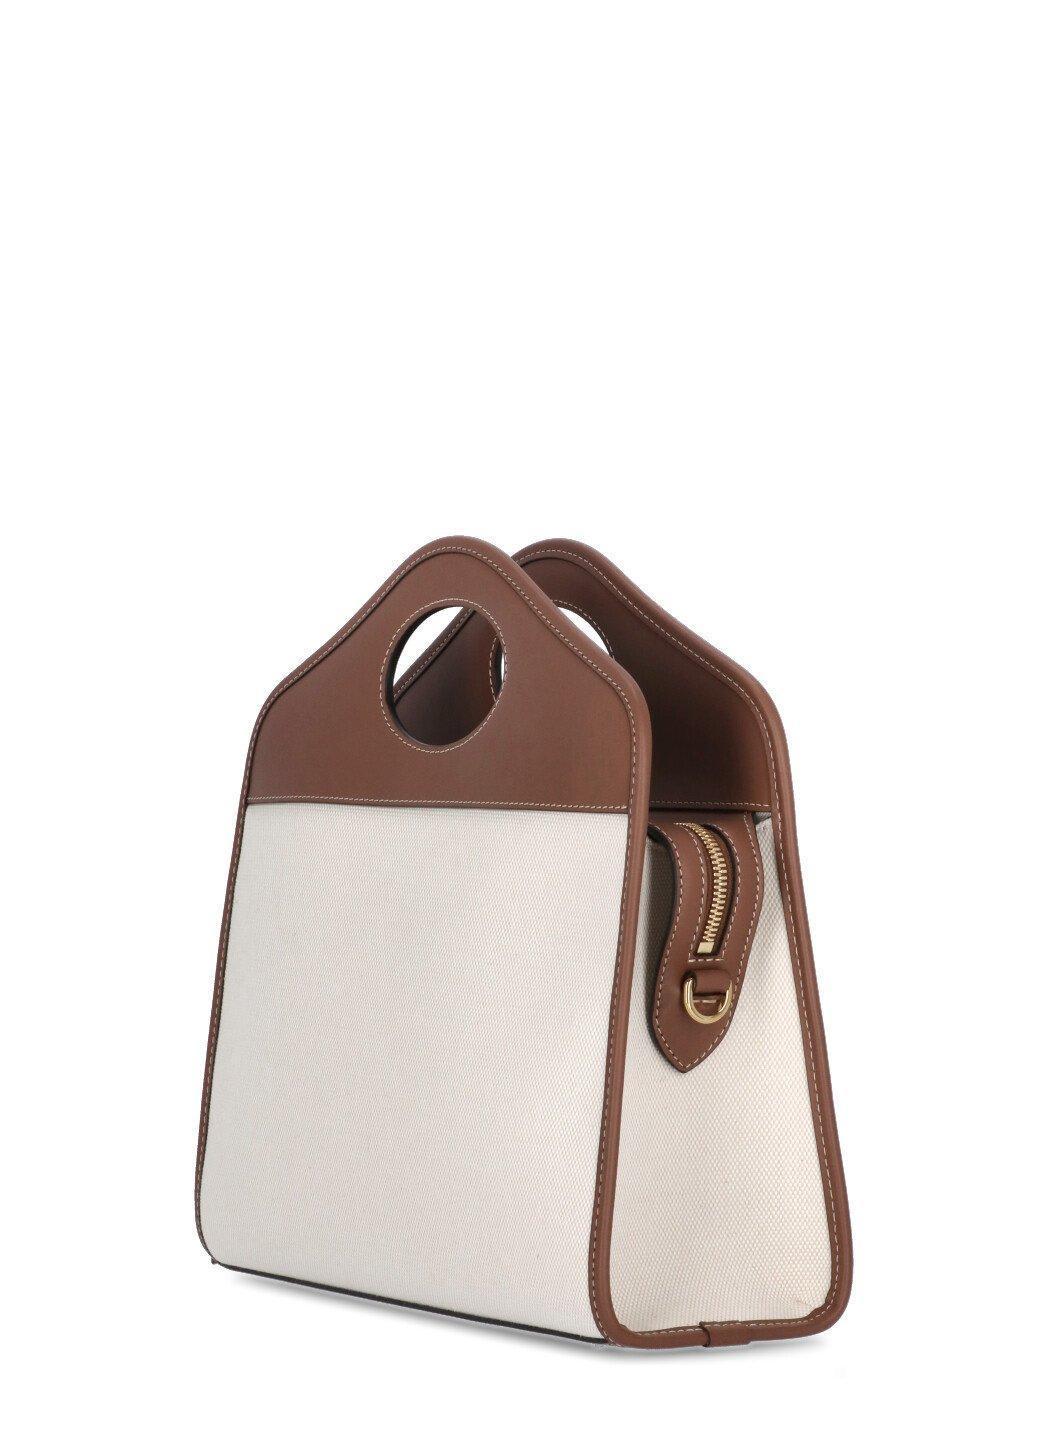 Two-tone Canvas and Leather Small TB Bag in Natural/malt Brown - Women